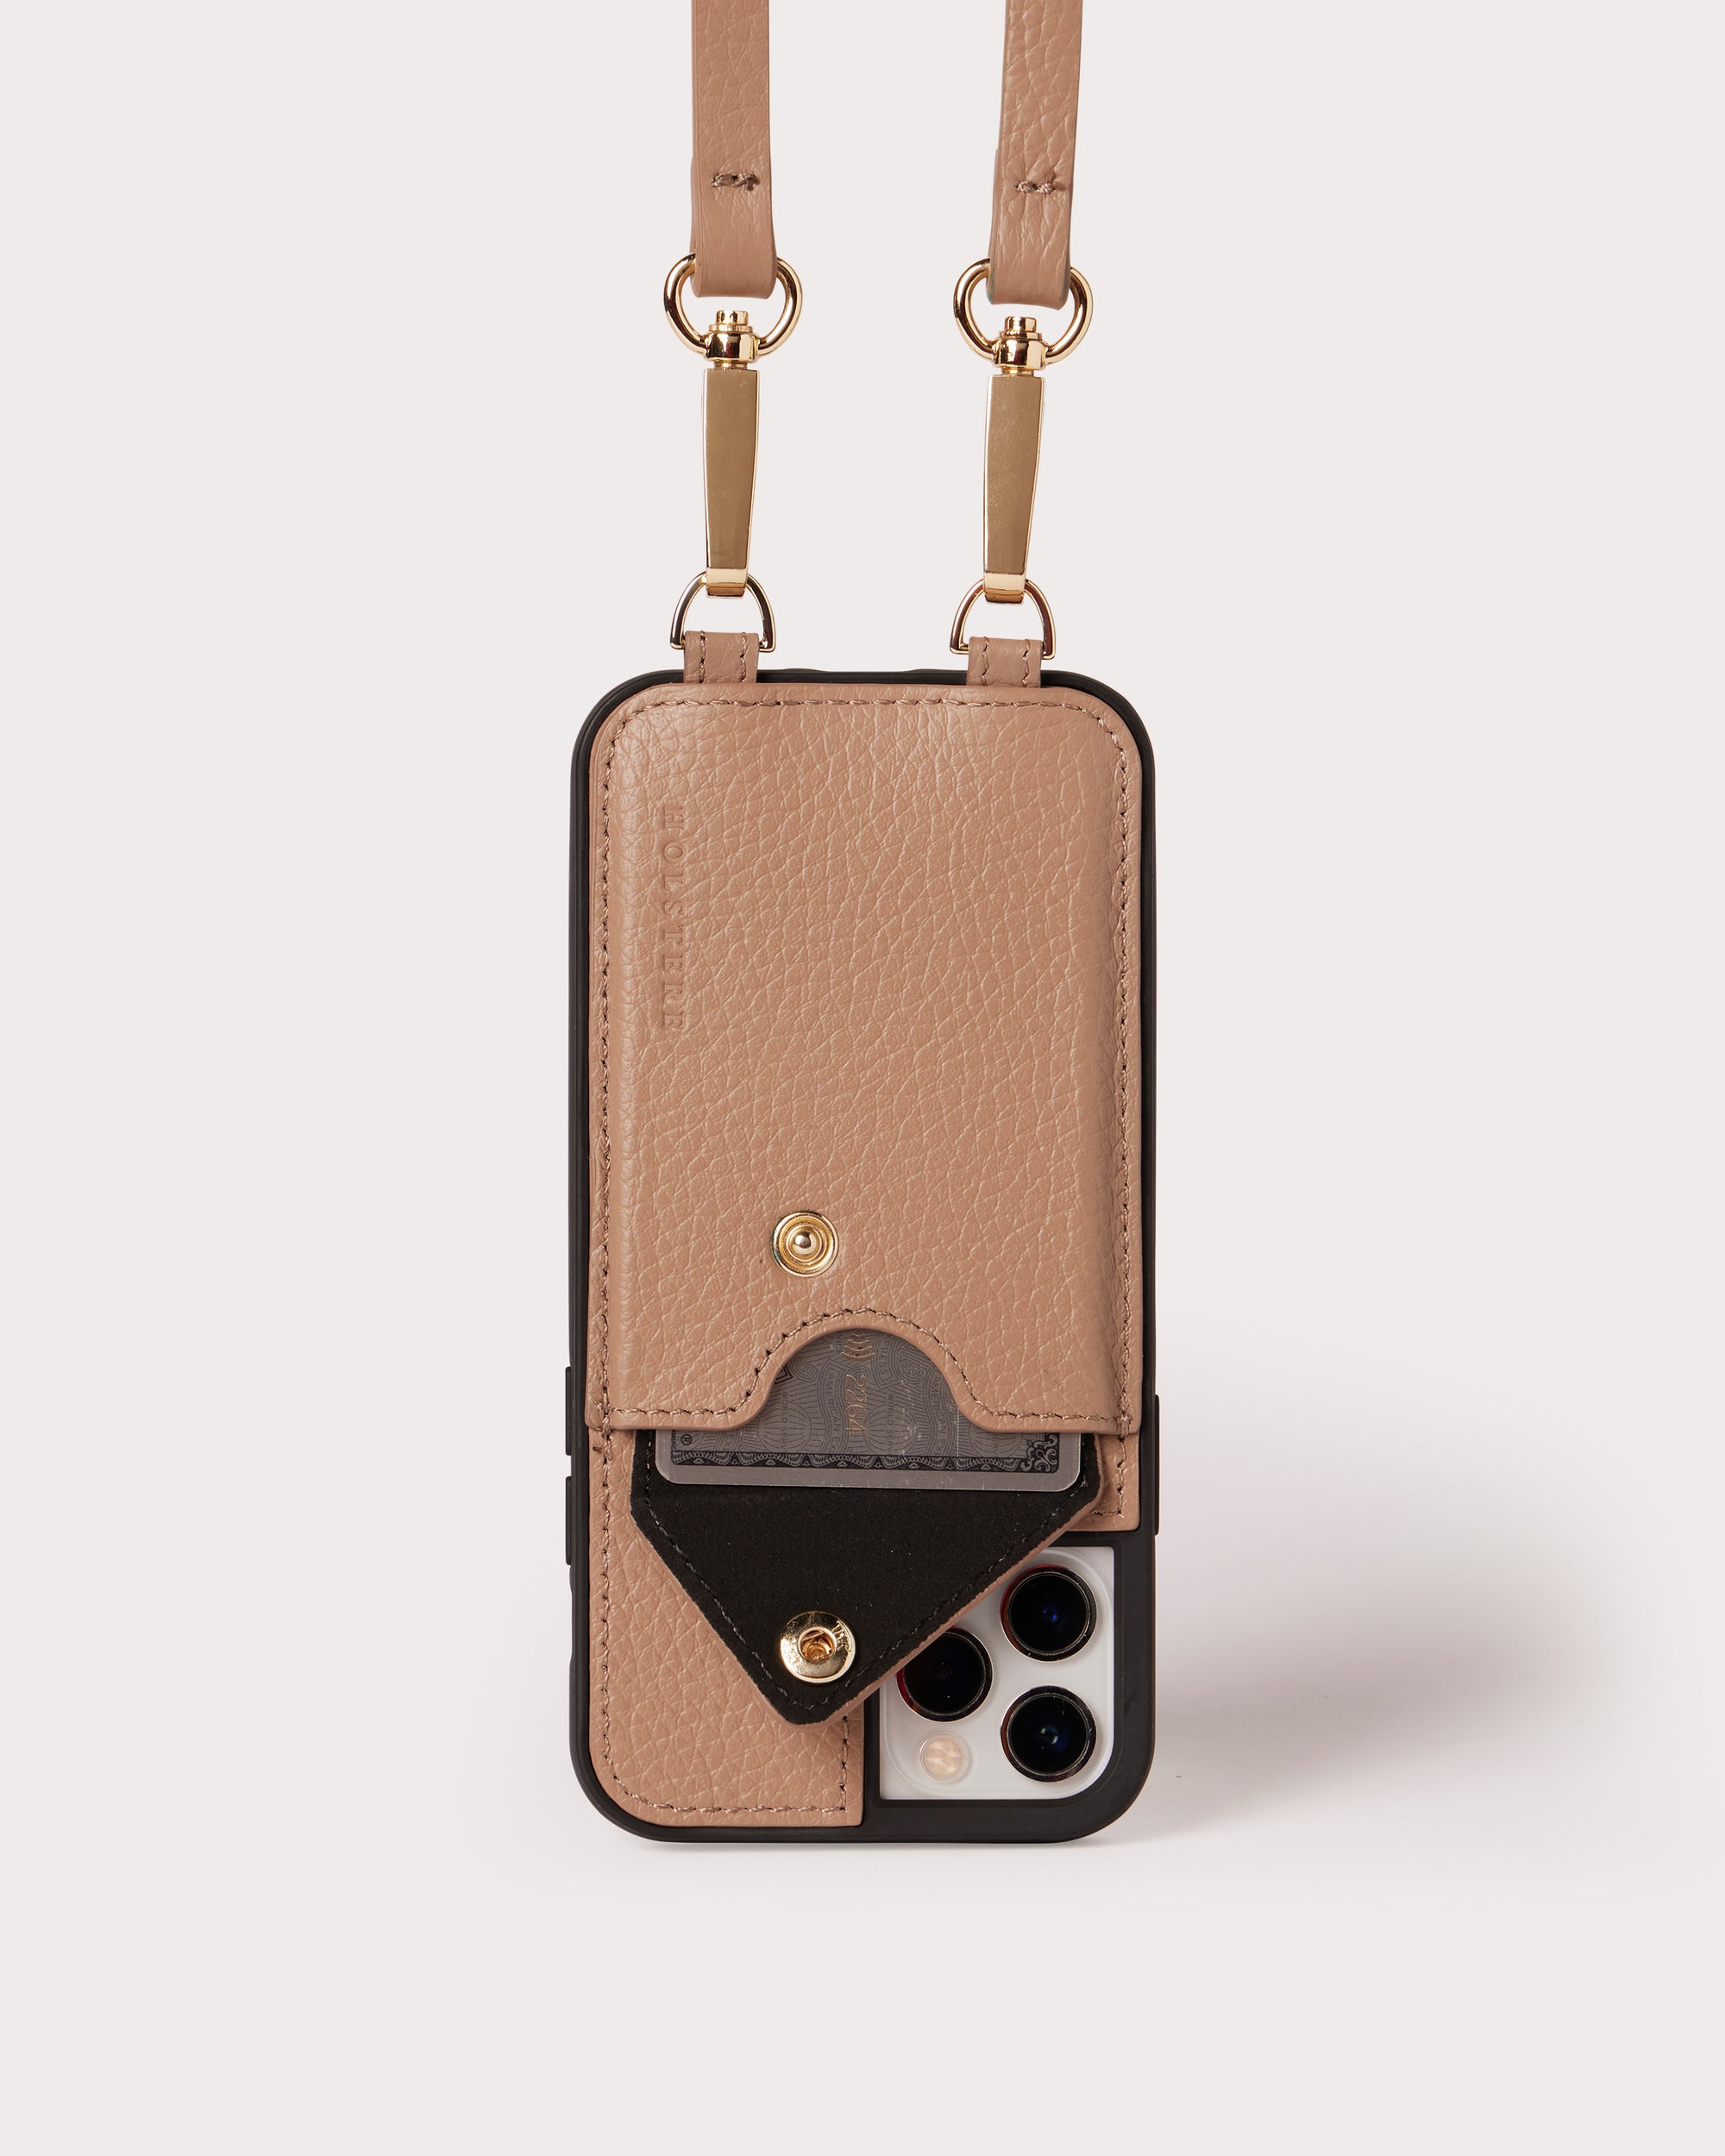 Holstere Genuine Leather iPhone Case Crossbody Phone Purse Cross Body Holster Clip for Easy Carry Hands Free - Taupe  (Beige / Biscuit / Buff)  Pebbled Real Leather Snap In Phone Case with Wallet Credit Card ID Sleeve, Snap Shut Button, and Adjustable Length Shoulder Strap with Gold Hardware and Clasps. iPhone Leash for iPhone 6, 6s, 7, 8, SE, XR, 11, 11 Pro, 11 Pro Max, 12, 12 Pro, 12 Pro Max, 13, 13 Pro, 13 Pro Max